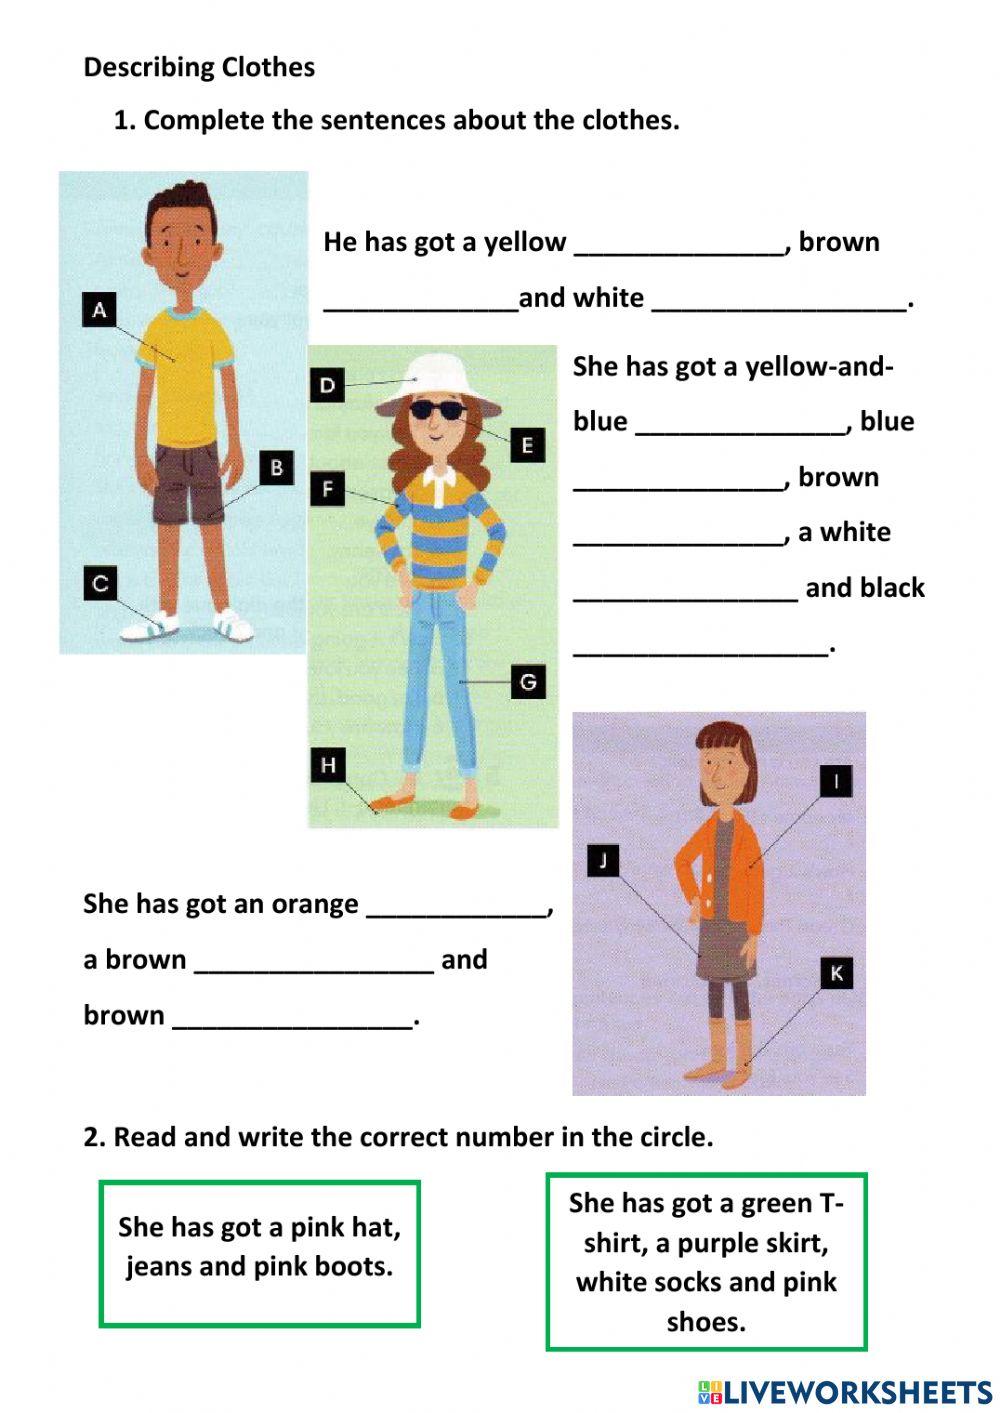 Learn Vocabulary Through Pictures - Describing Clothing - English Practice  Online